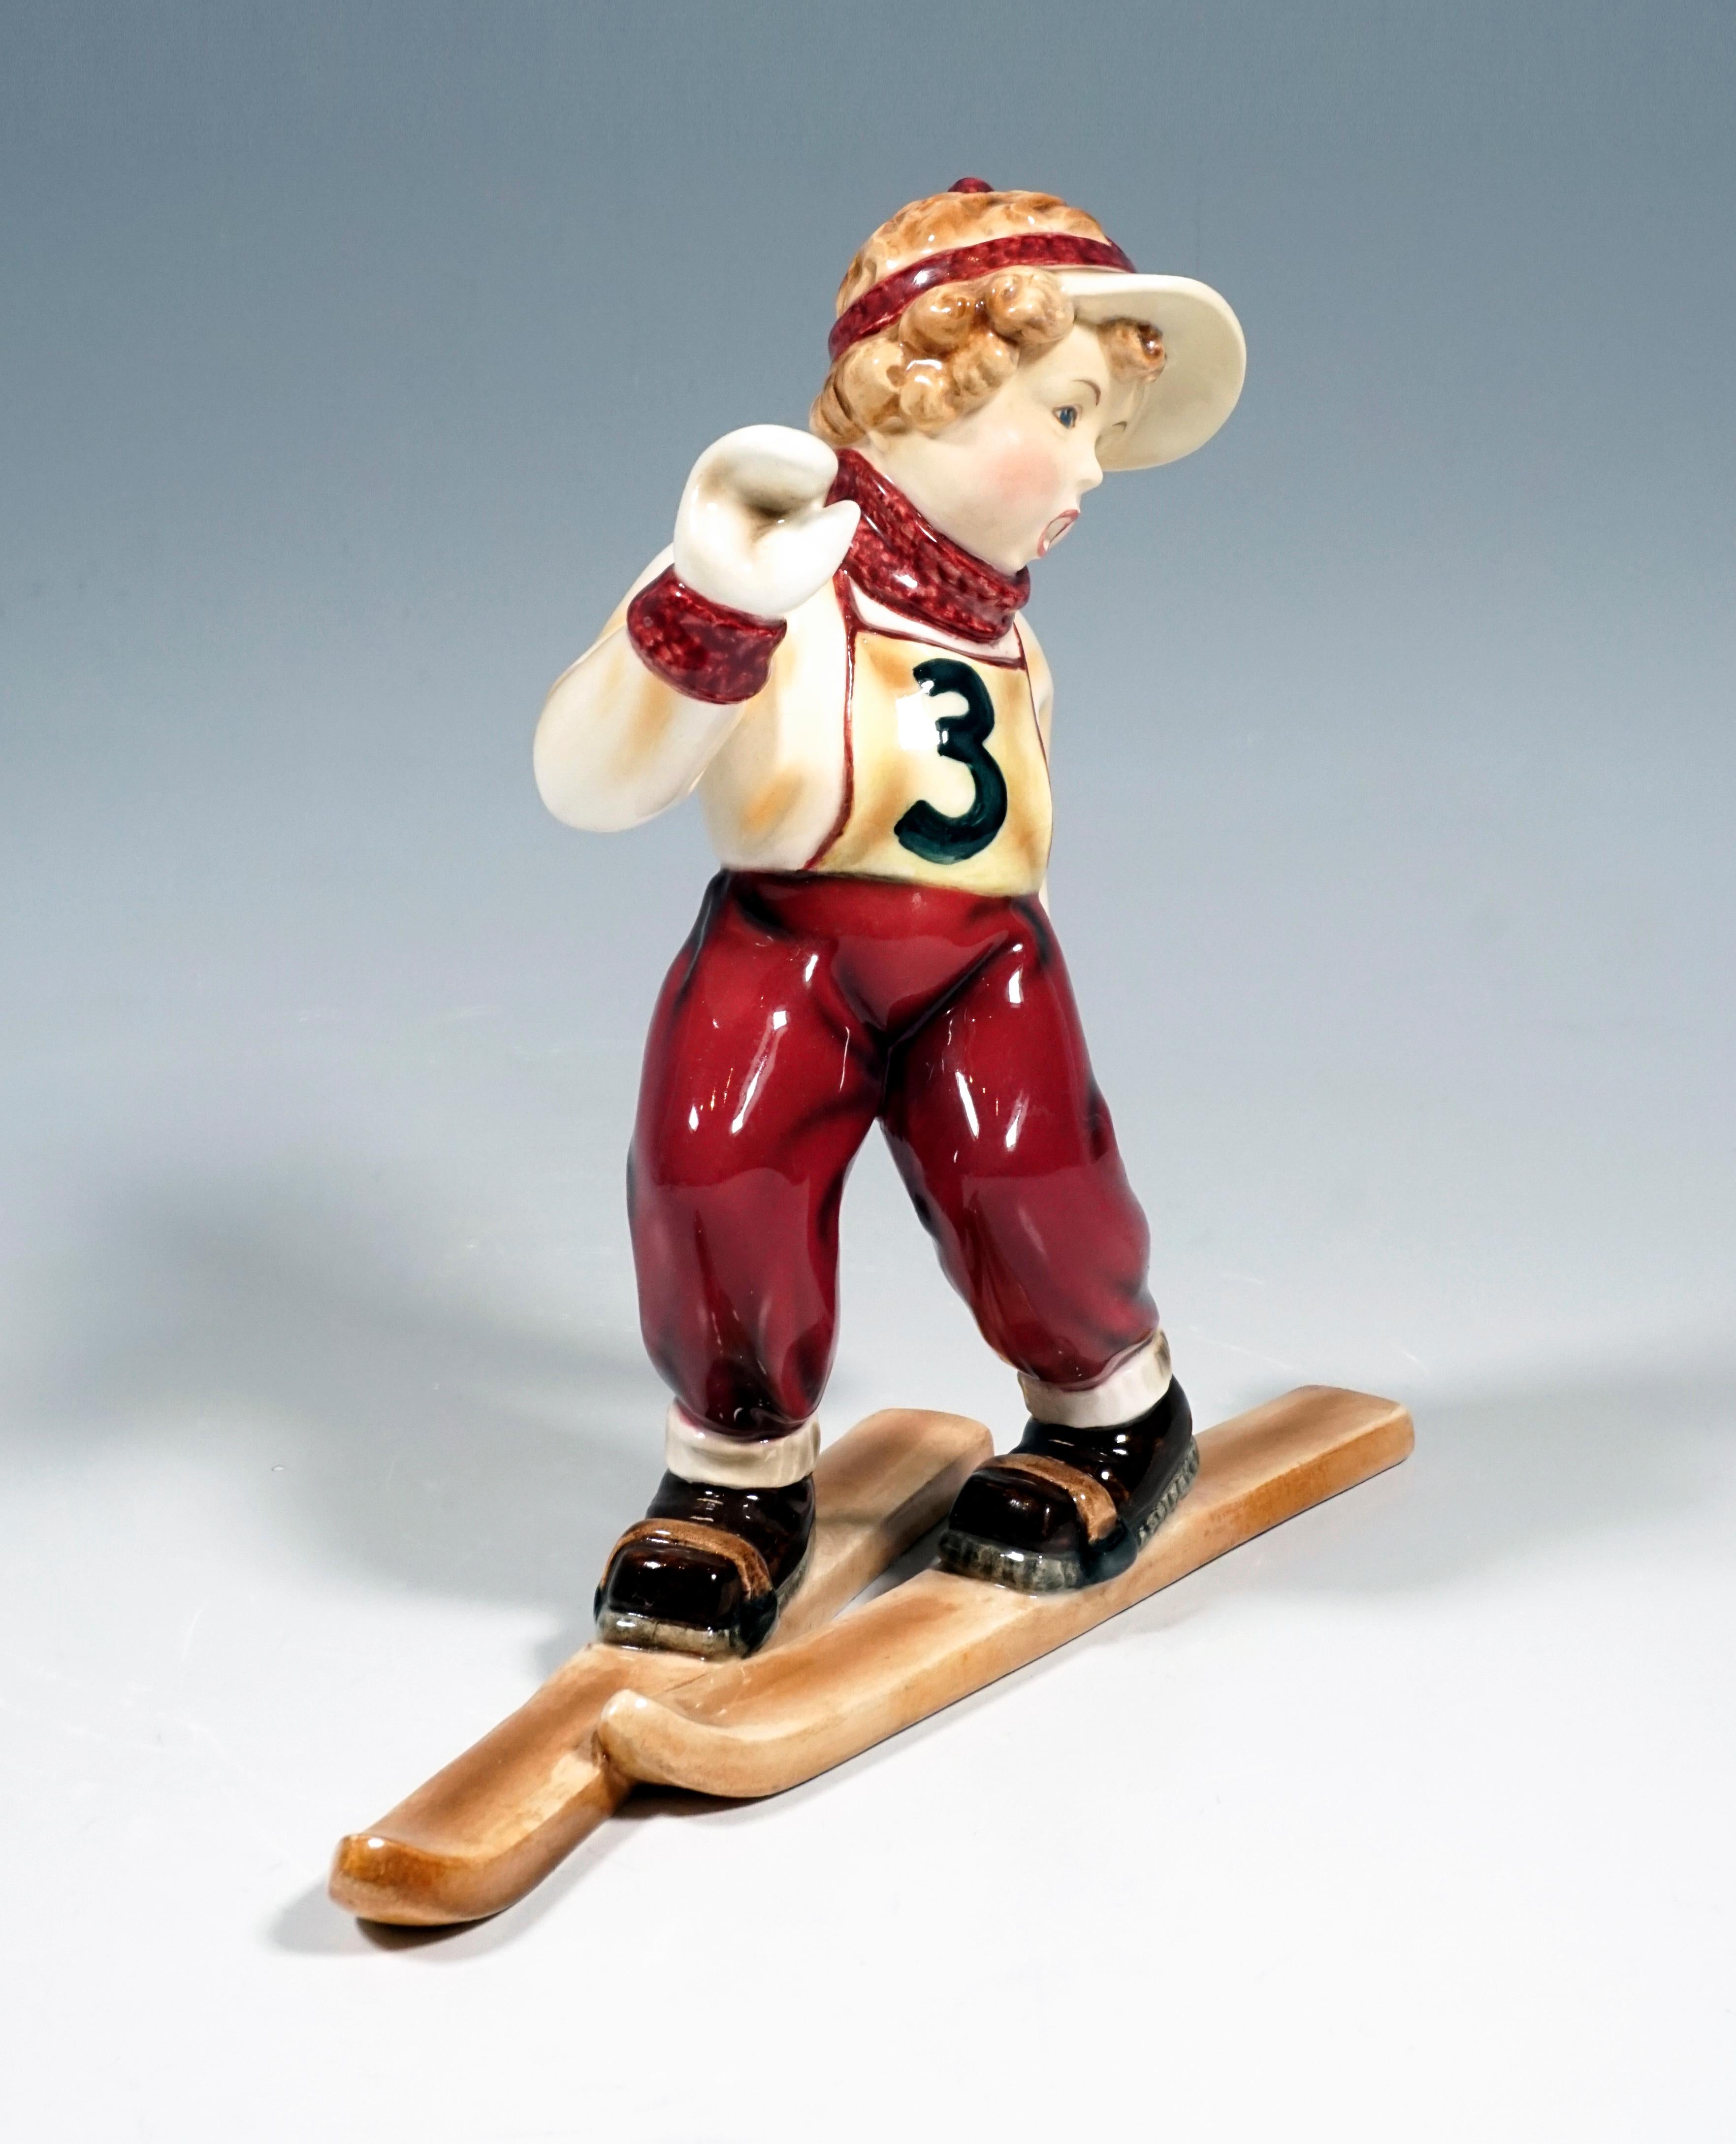 Rare Goldscheider Vienna Figurine of the 1940s.
Little girl in red ski pants with the start number '3' standing wobbly on skis.

Designed by KARL SAILER (1905 - ?), Retoucheur and modeller, has created numerous models for Goldscheider as a